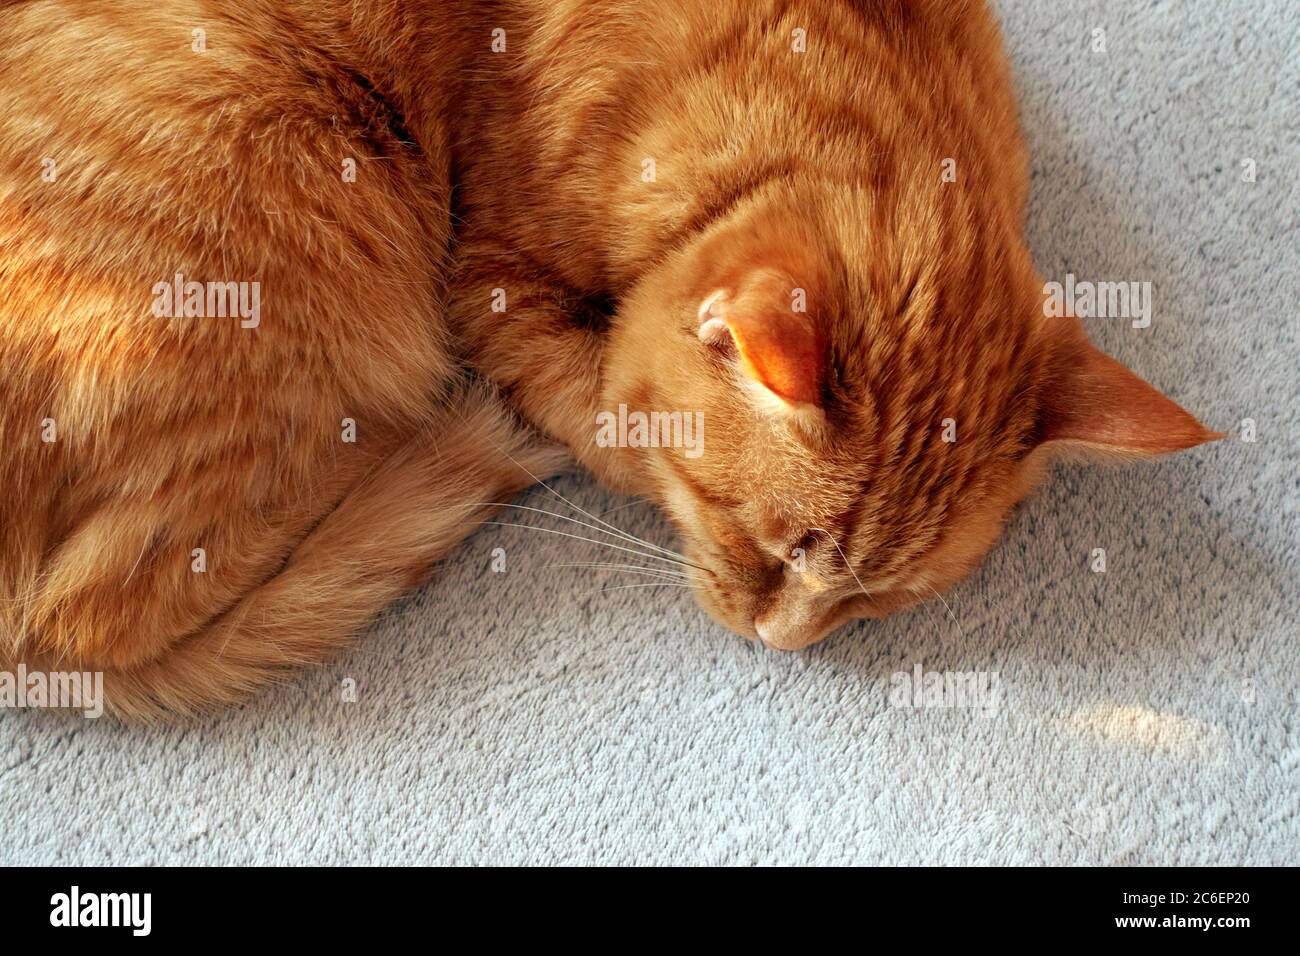 Closeup portrait of a red ginger cat lying curling up and sleeping on a bed covered with gray blanket. Tranquility and relaxation concept. Stock Photo